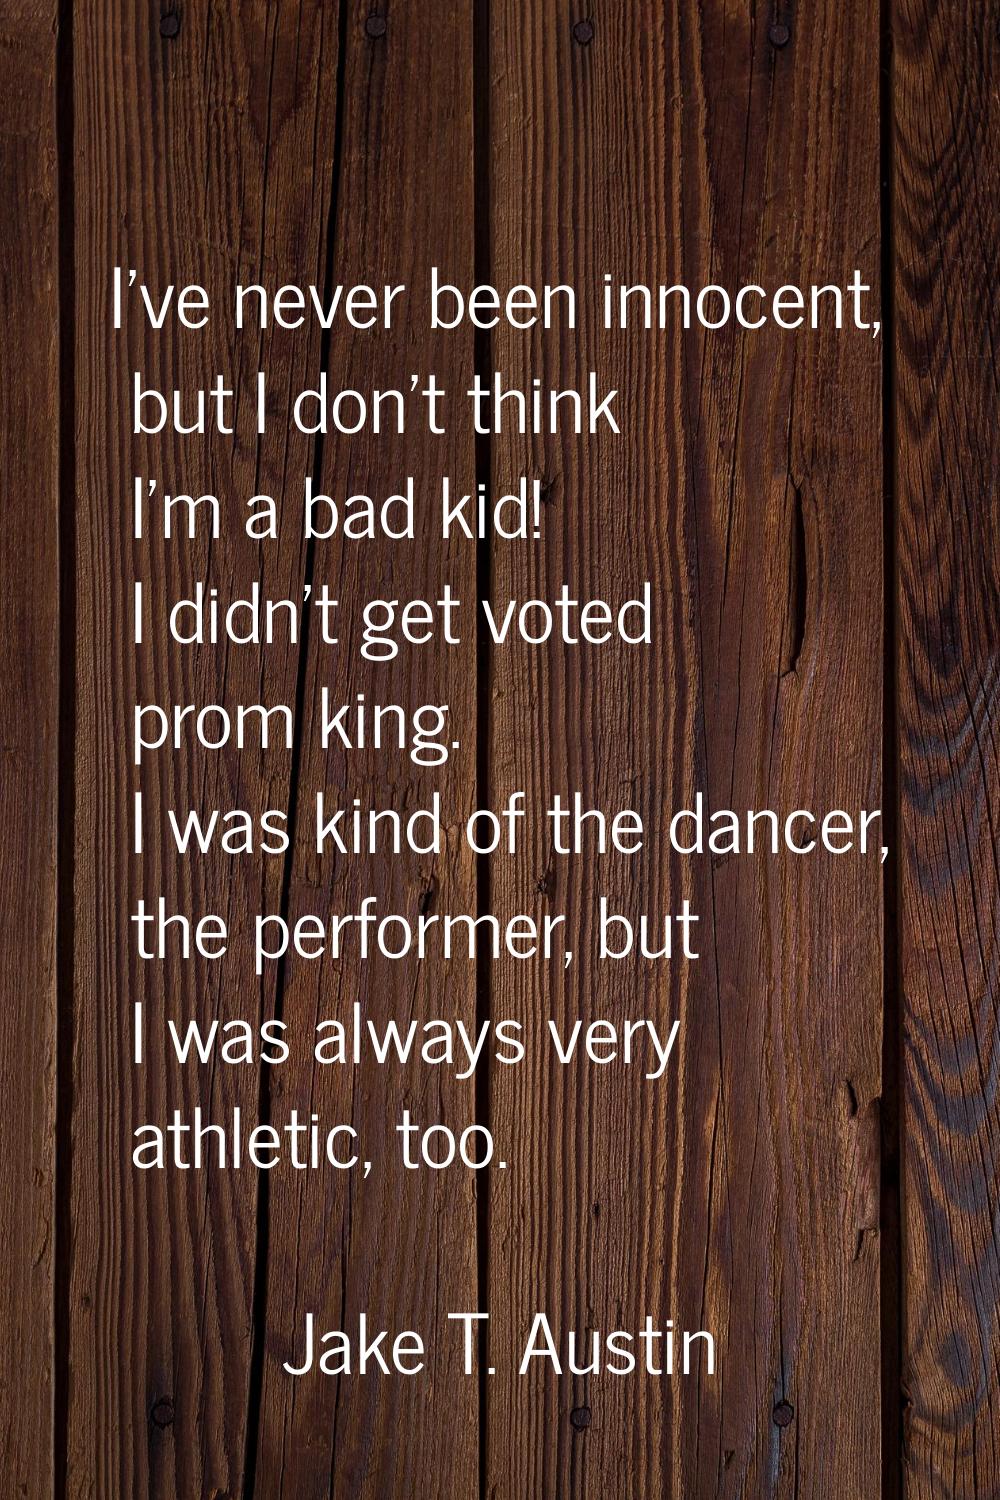 I've never been innocent, but I don't think I'm a bad kid! I didn't get voted prom king. I was kind